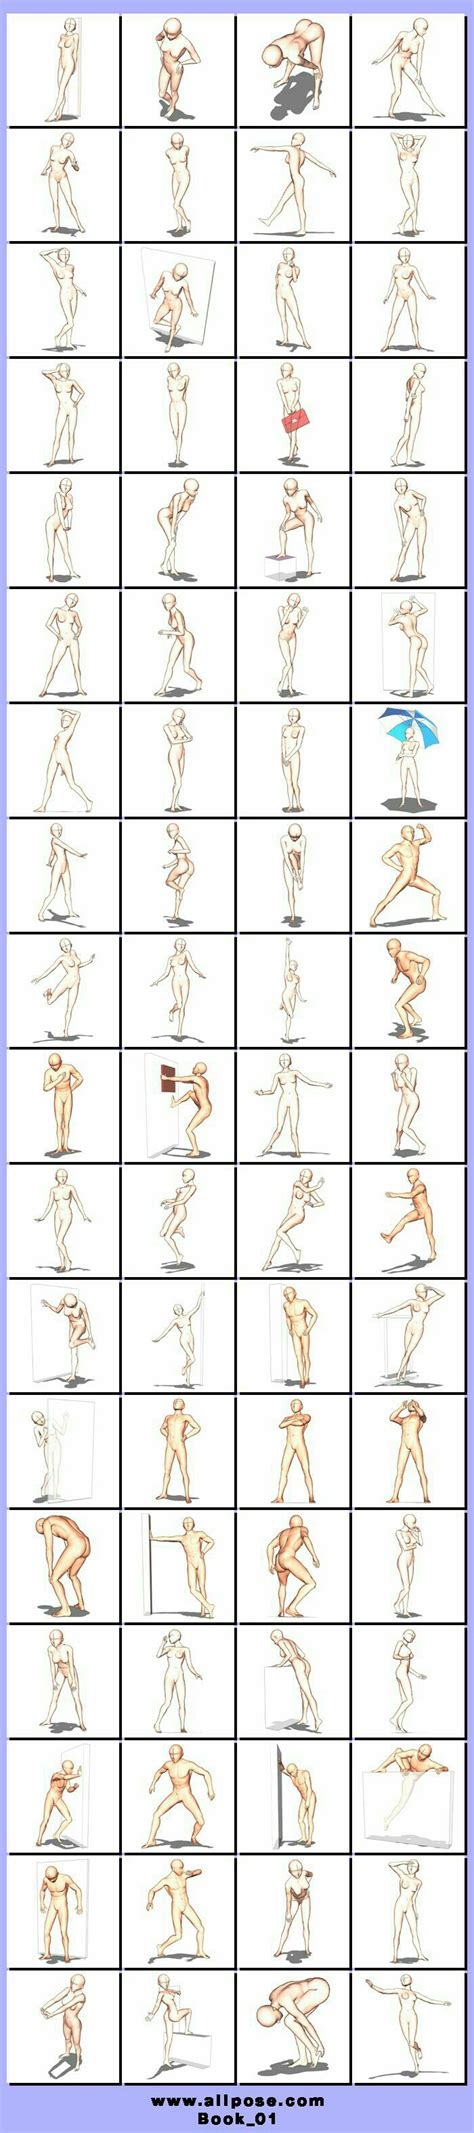 Body Positions Text How To Draw Mangaanime Drawing Techniques